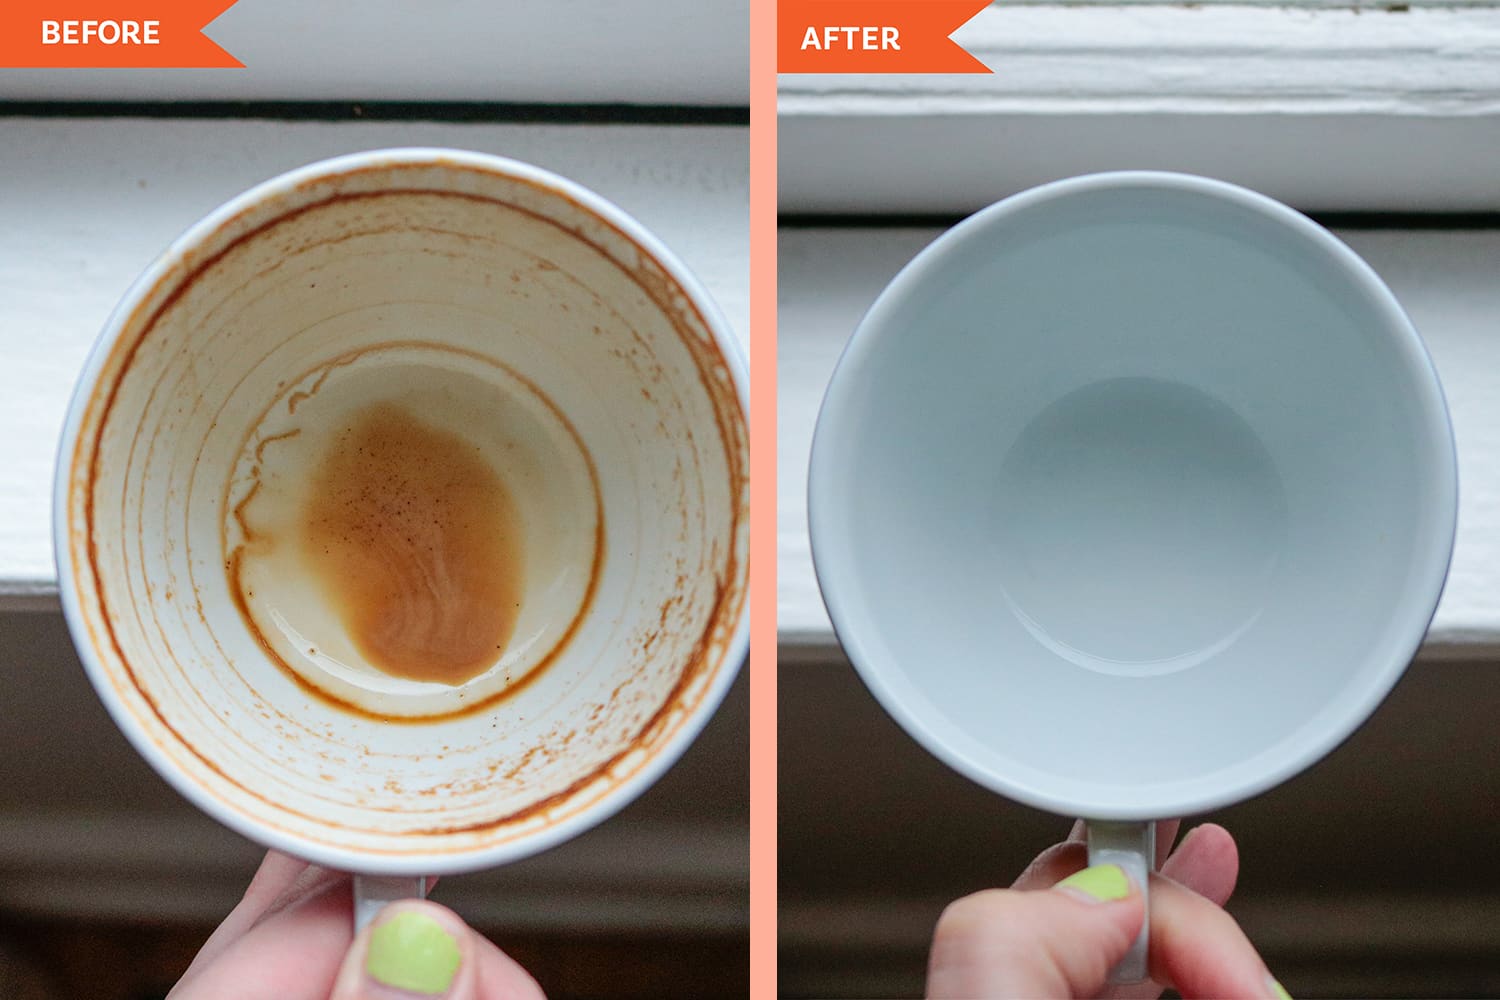 Can These Buzzy New Cleaning Tablets Really Remove Coffee And Tea Stains  From Your Favorite Mug?